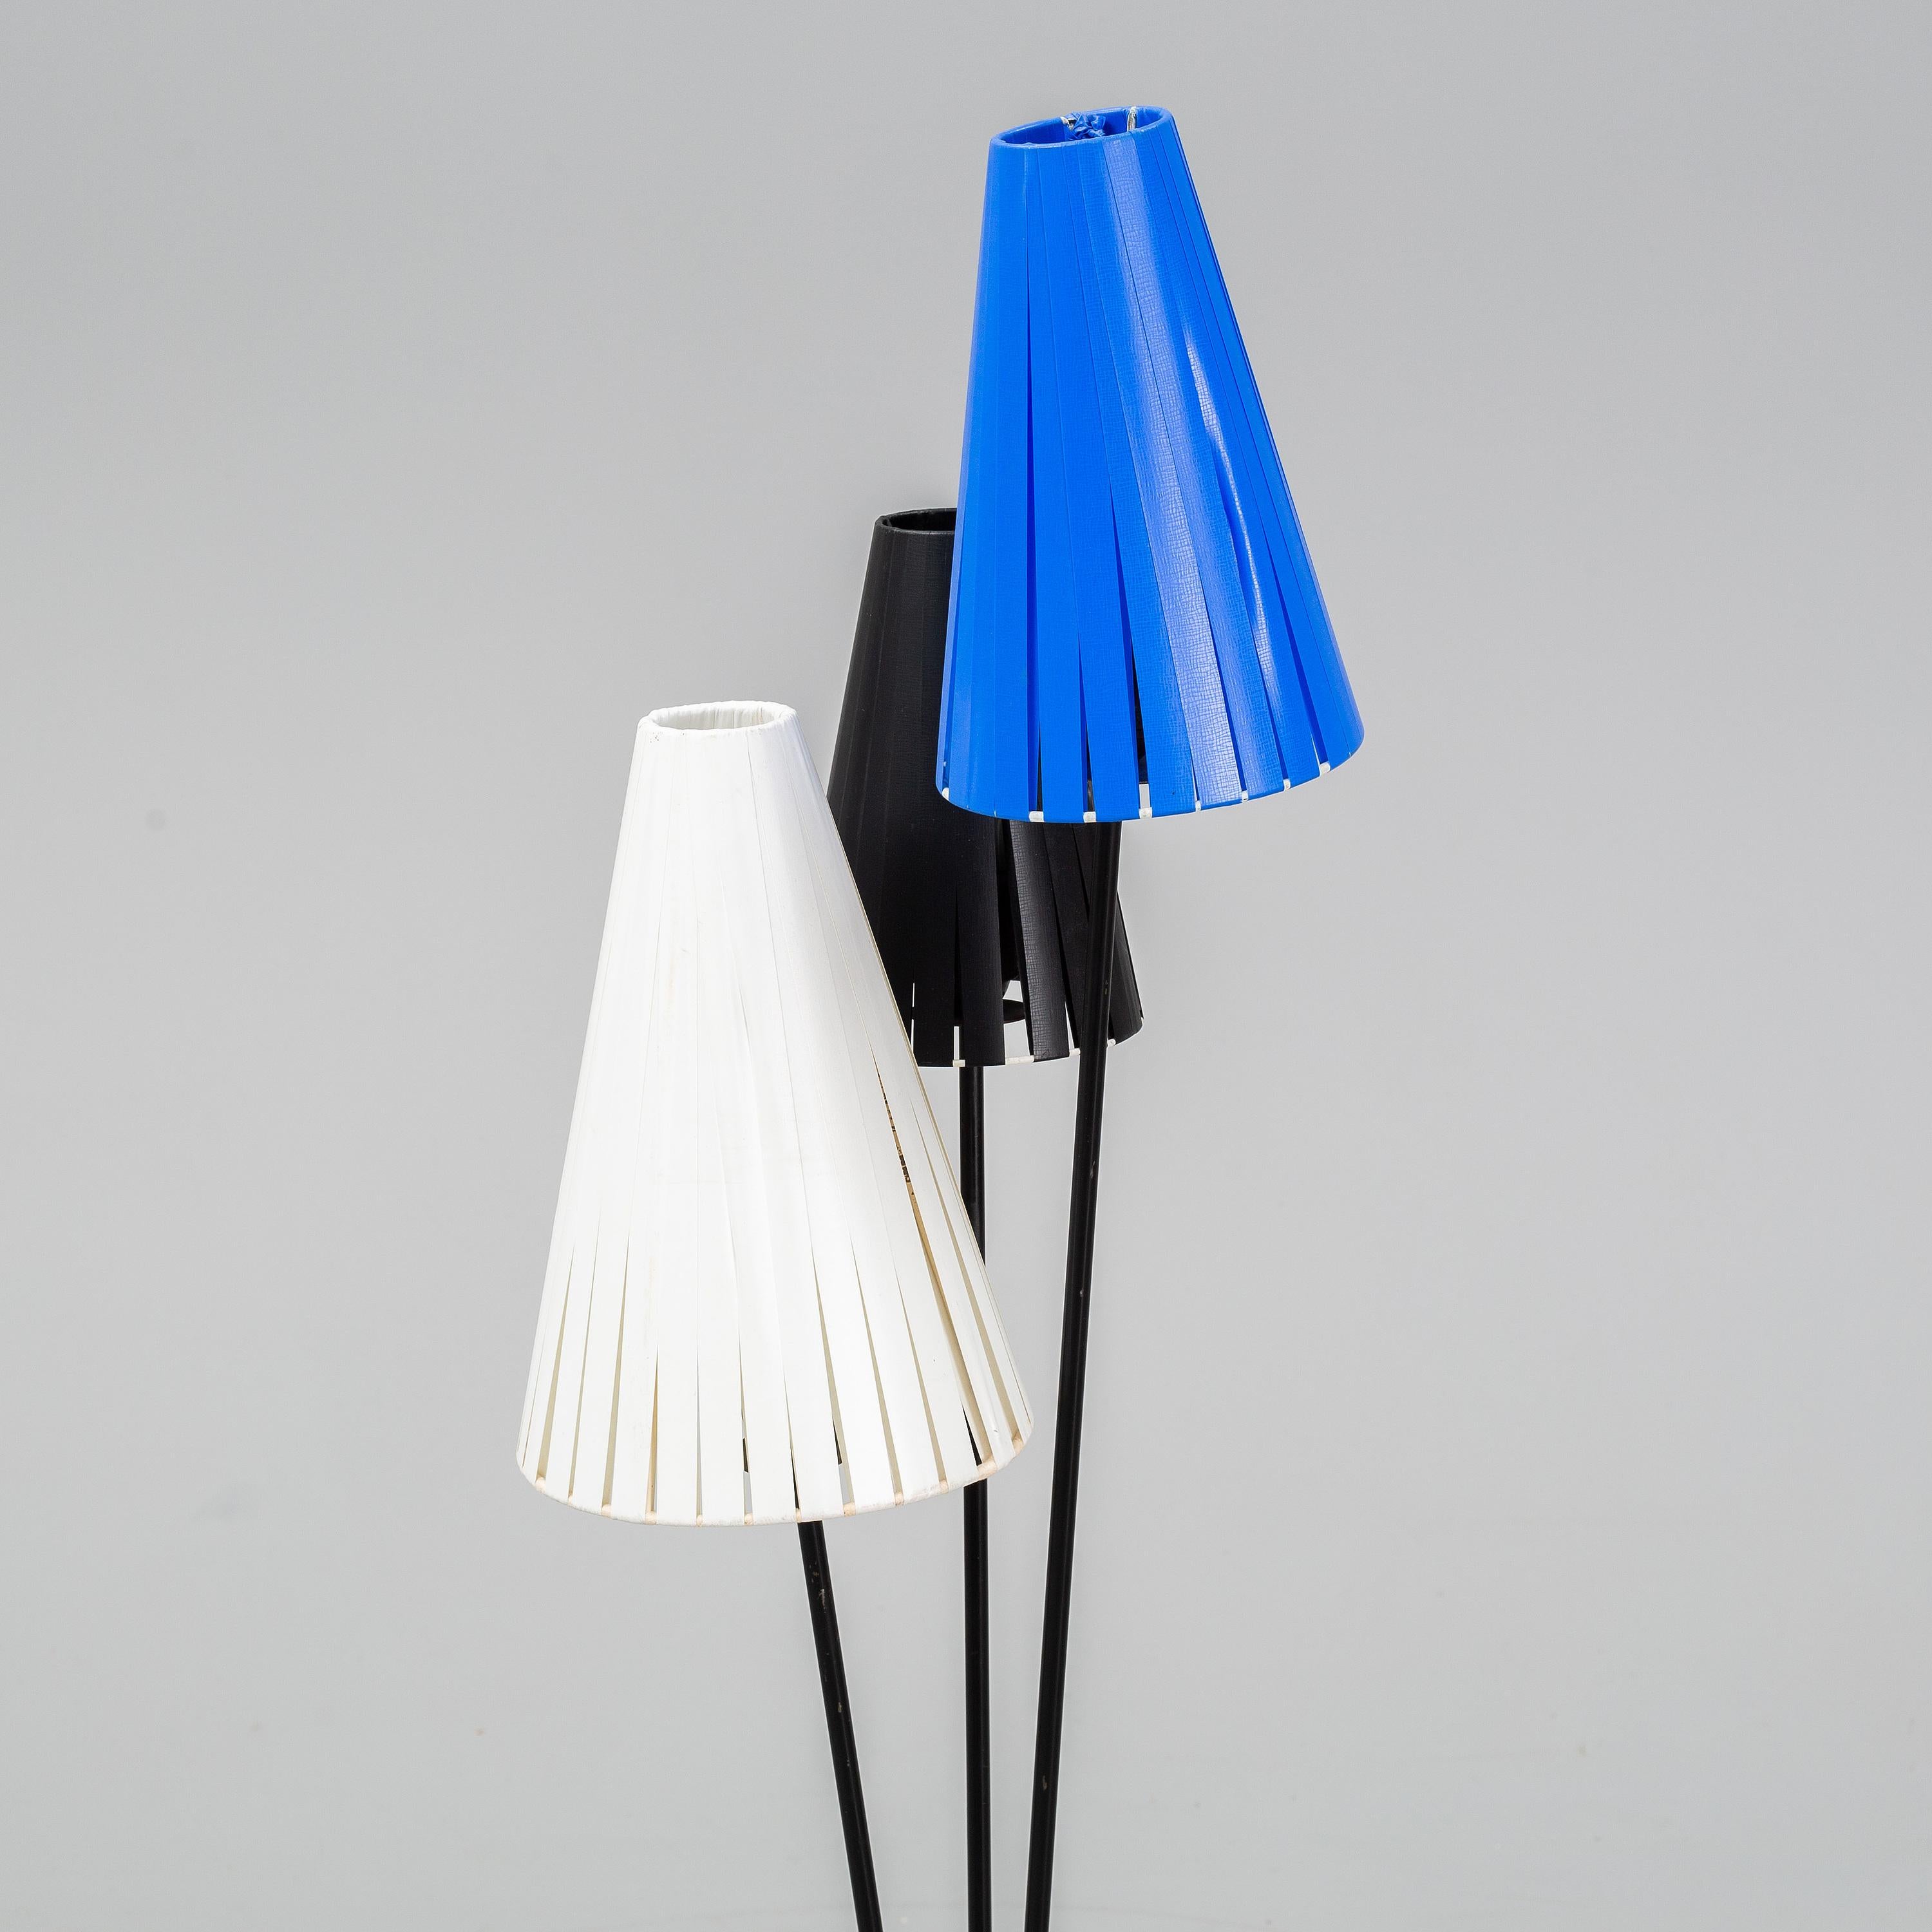 ONE YEAR ANNIVERSARY SALE! As a thank you for a great 1st year! Blue, white and black Swedish floor light from 1950s. Contains three shades and three bulb sockets and brass details. In great vintage condition, fun addition.